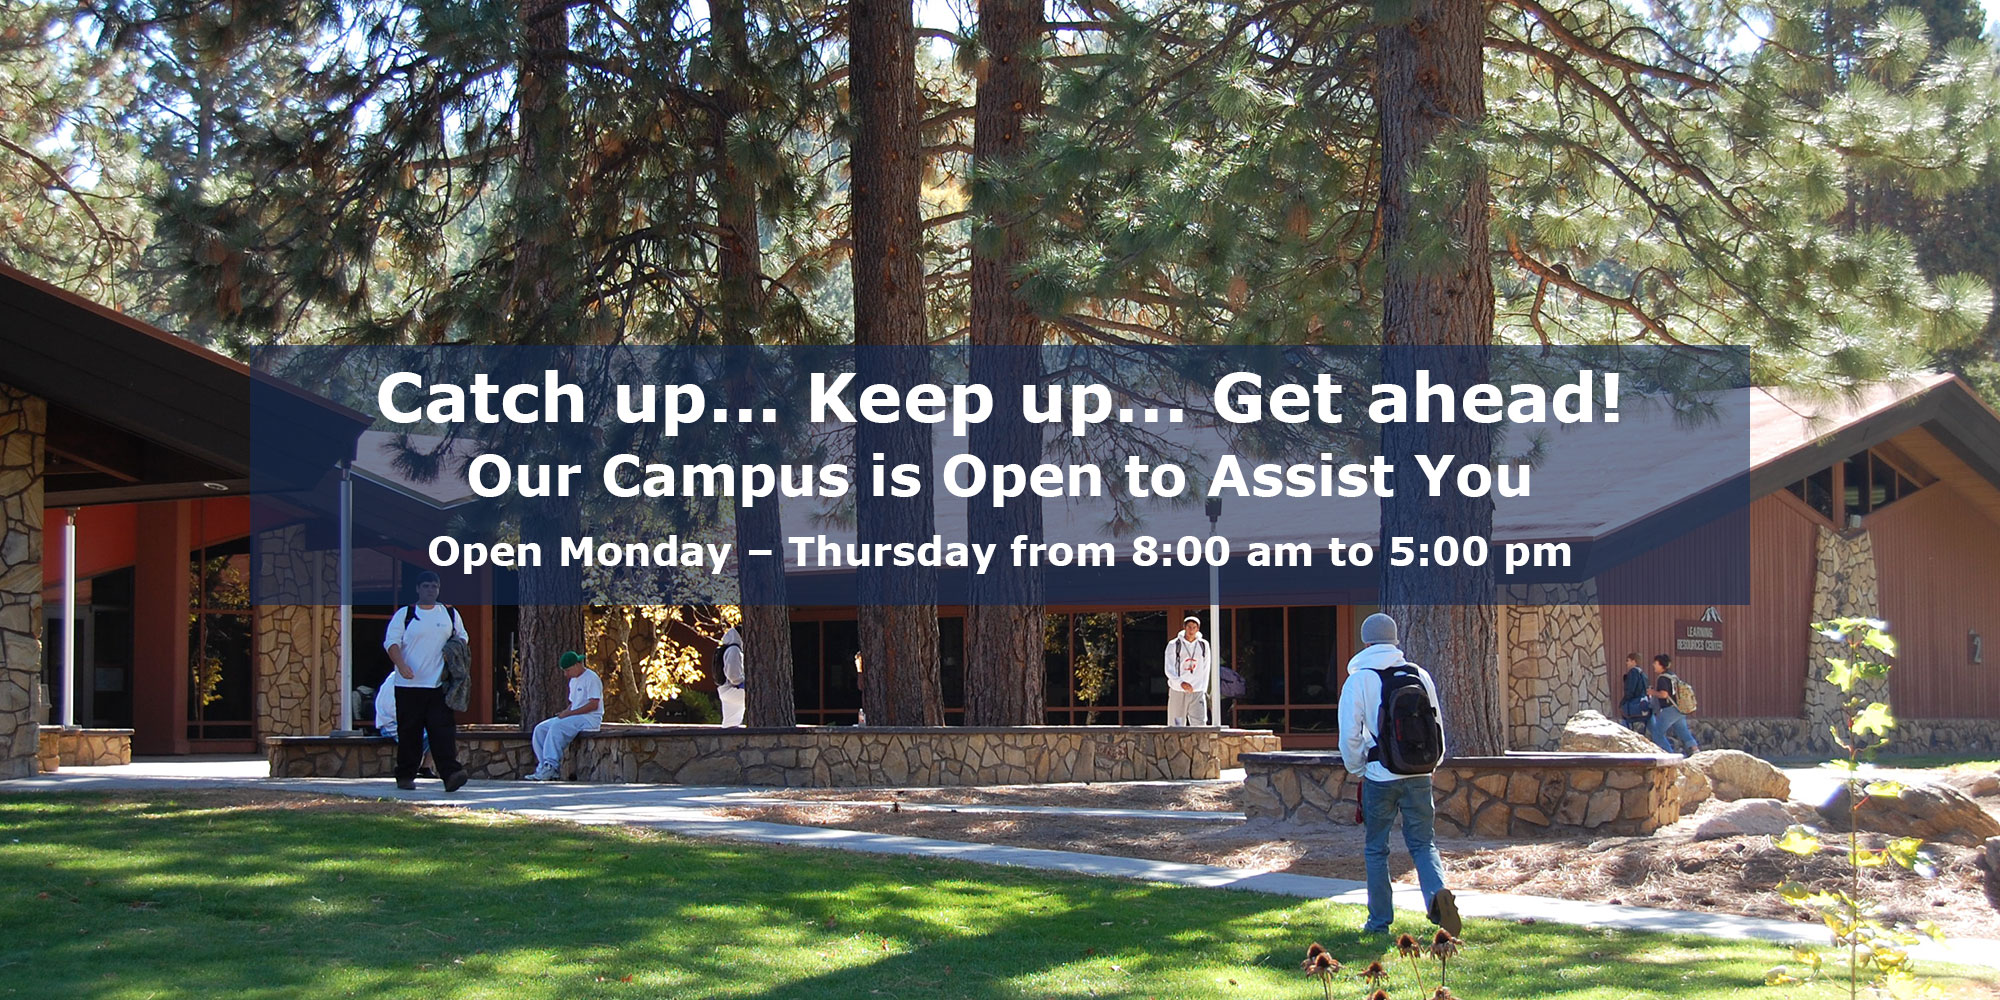 Catch up... Keep up... Get ahead! Our Campus is Open to Assist You. Open Monday – Thursday from 8:00 am to 5:00 pm.